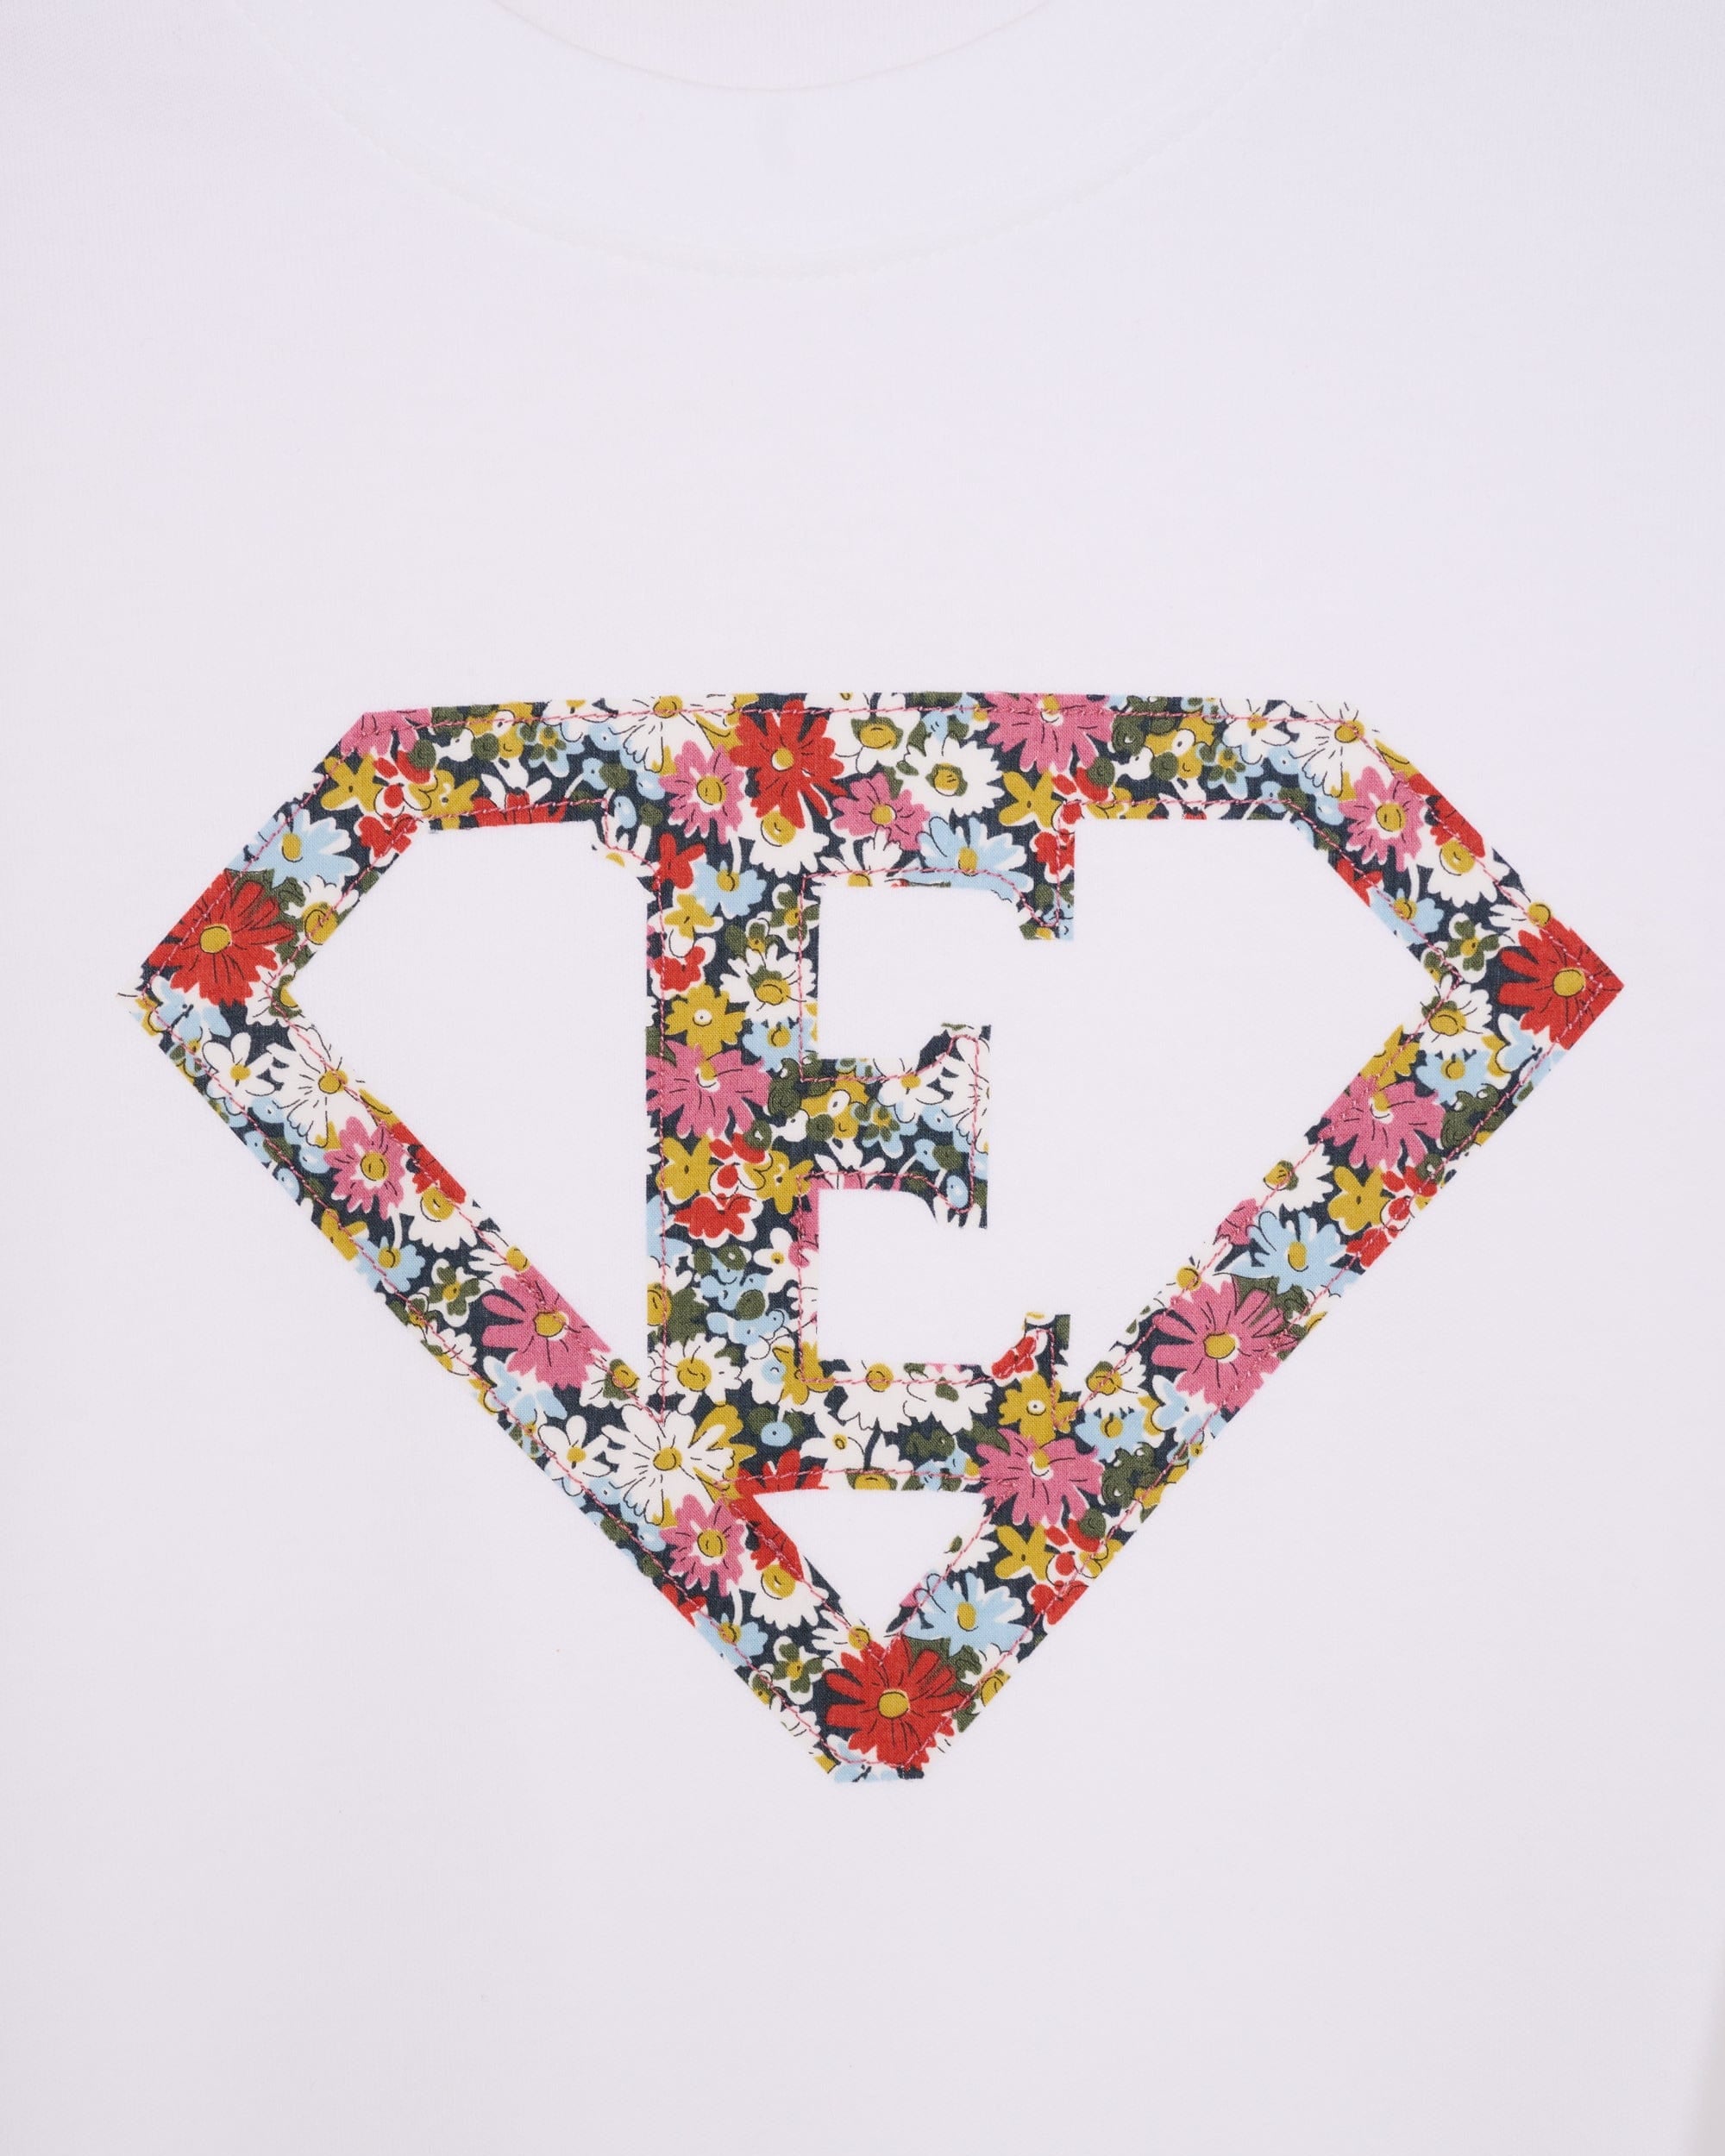 Magnificent Stanley Tee Superhero White T-Shirt in choice of Liberty Print